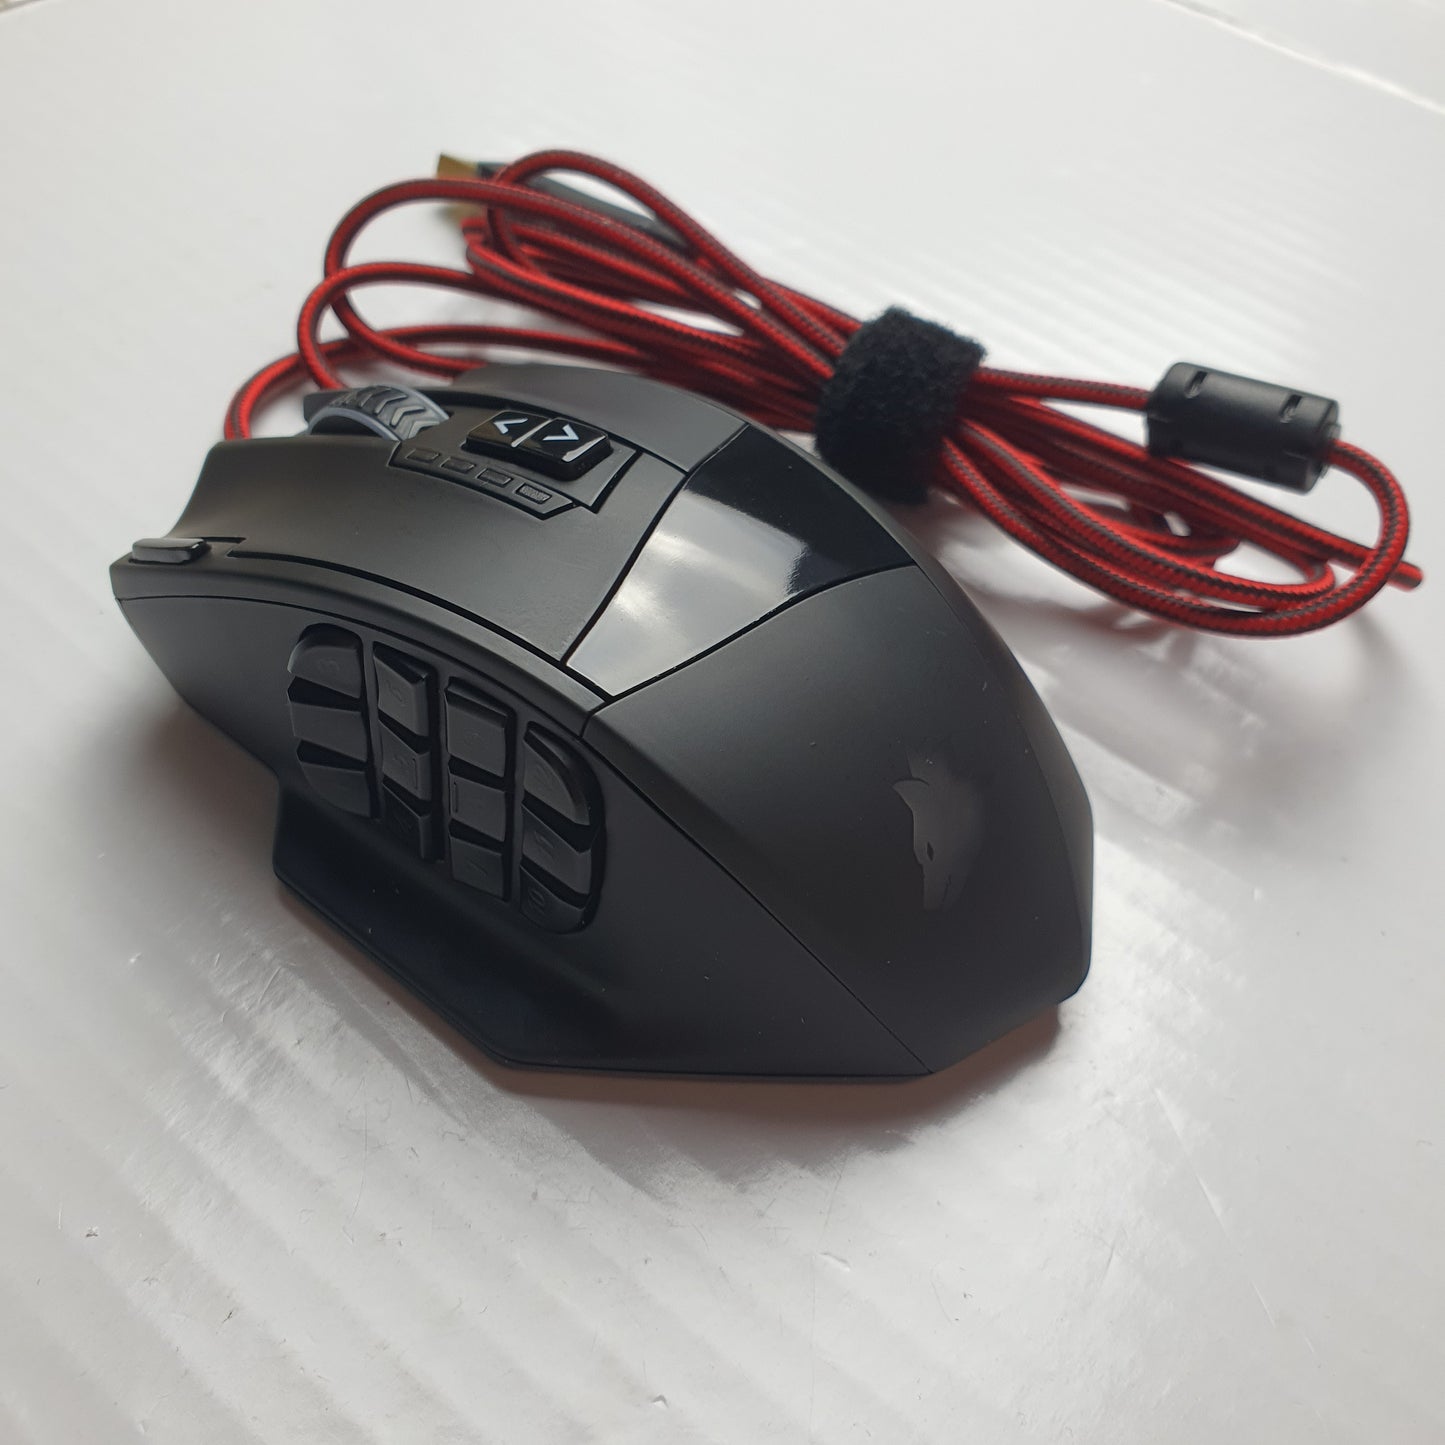 Titanwolf Gauntlet USB MMO Gaming Mouse